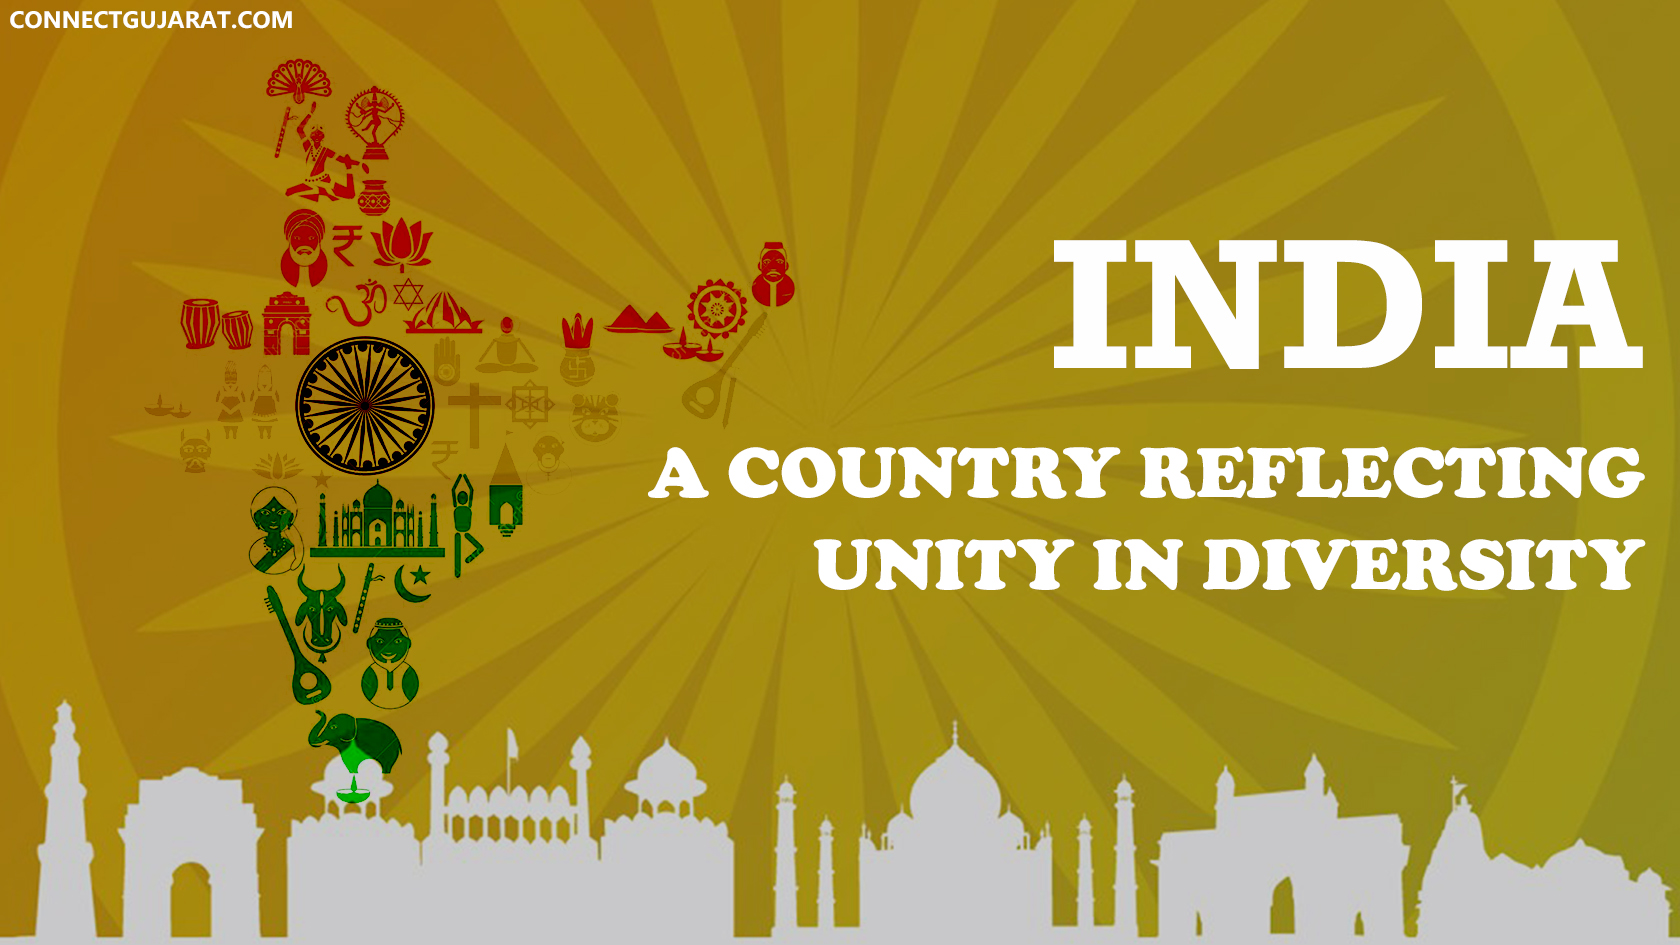 India, a country reflecting Unity in Diversity